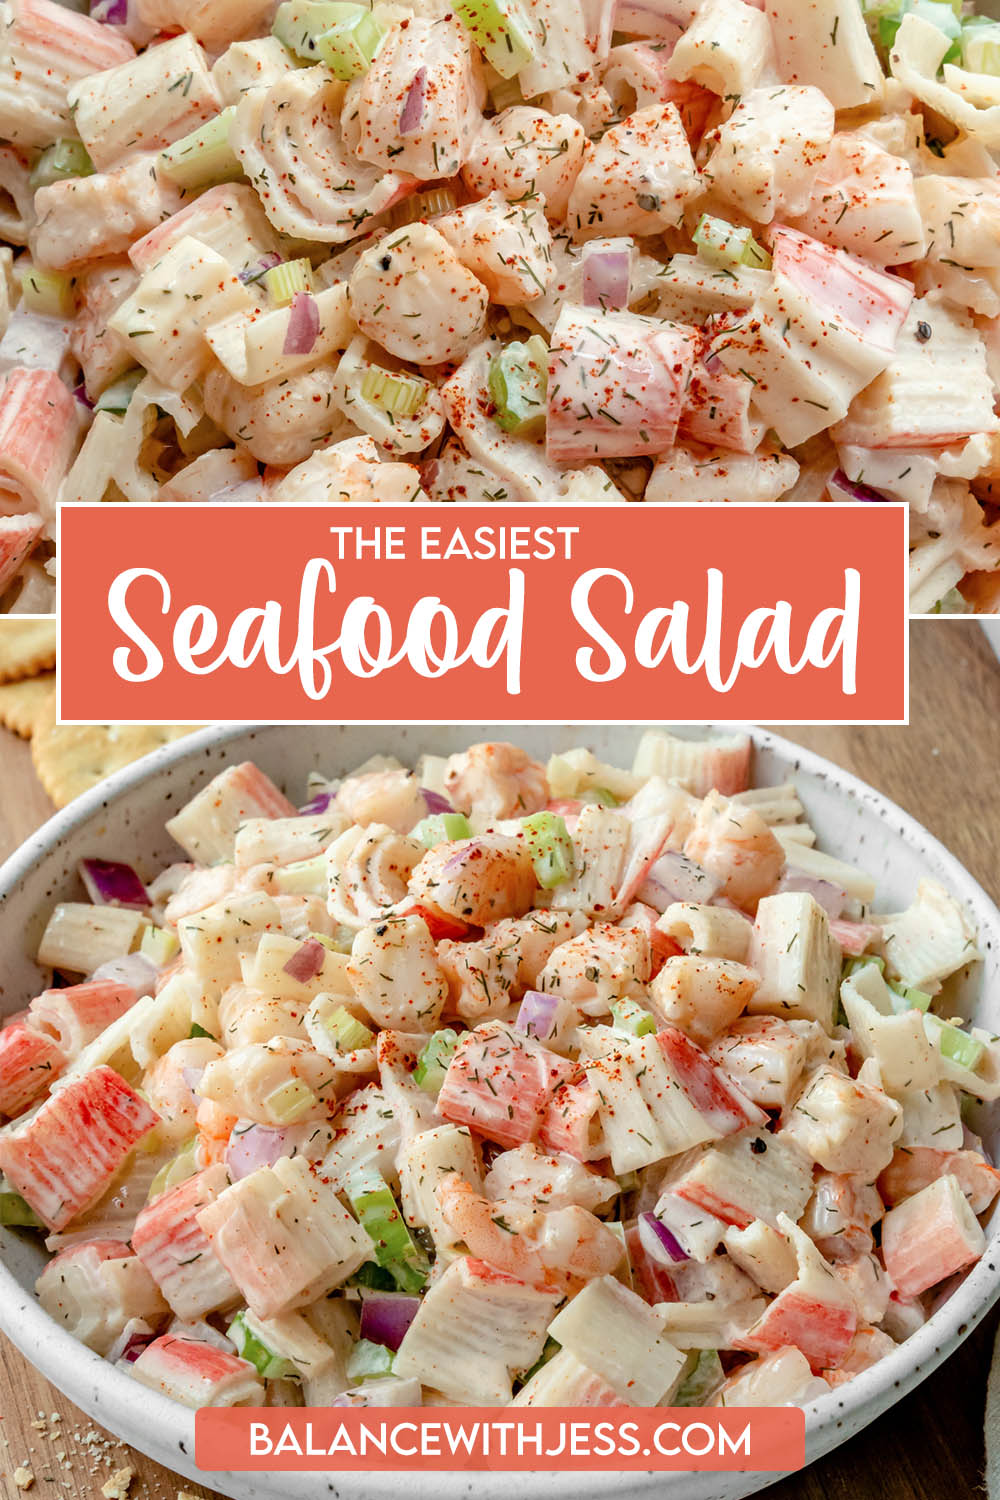 This easy Seafood Salad is light, creamy, and best served cold! It's a delicious blend of imitation crab, fresh shrimp, and fresh vegetables. It's the perfect summer side or snack and great for picnics, BBQs, and cookouts.